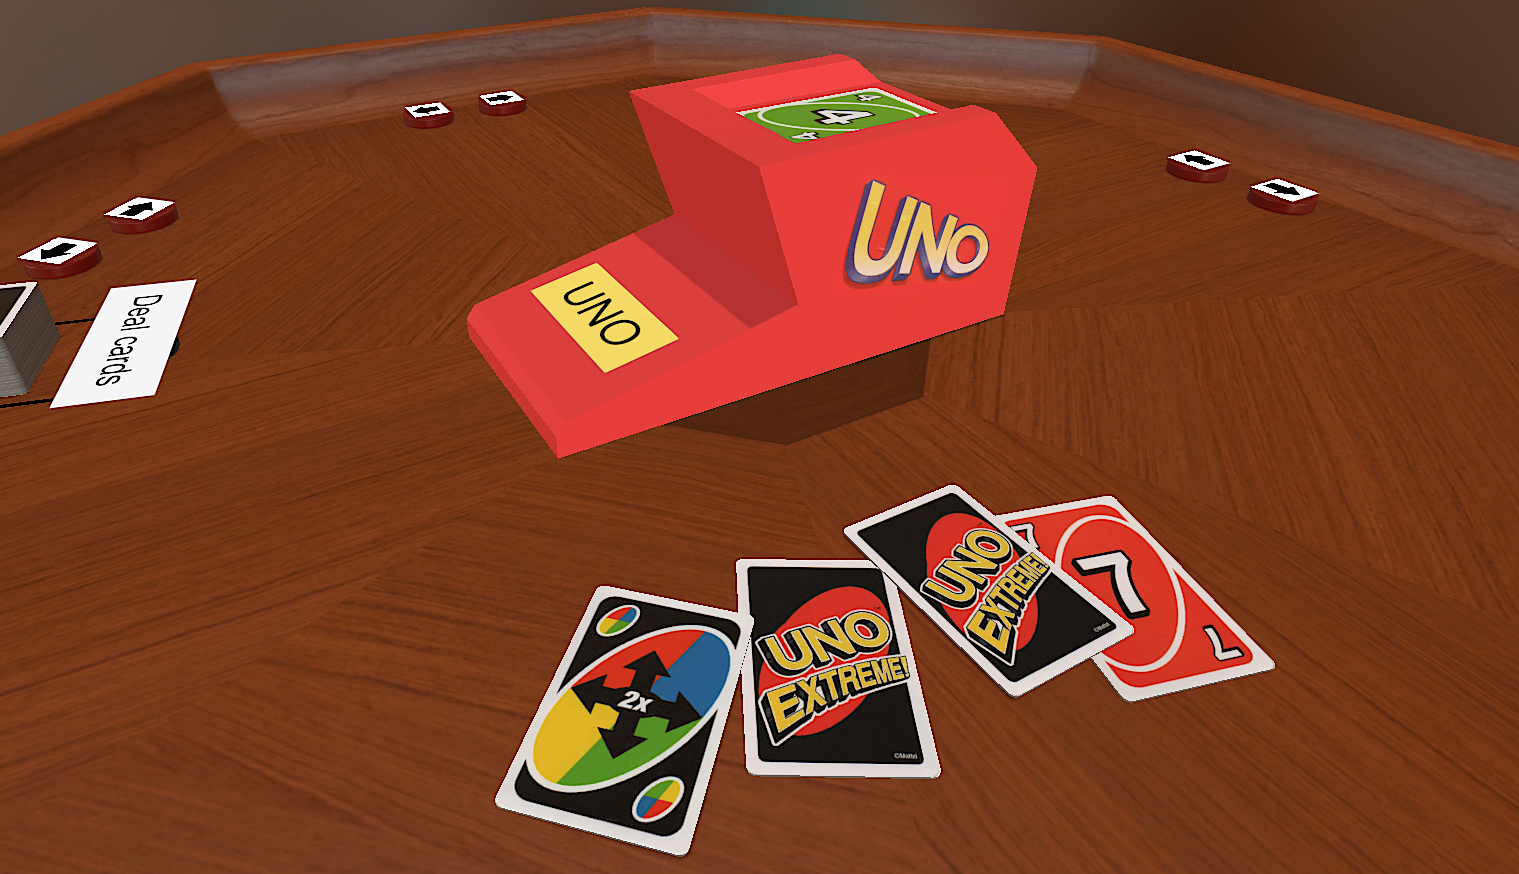 A screenshot from the tabletop simulator game. A selection of uno game cards are on the table next to a red block that launches the cards on a button press.